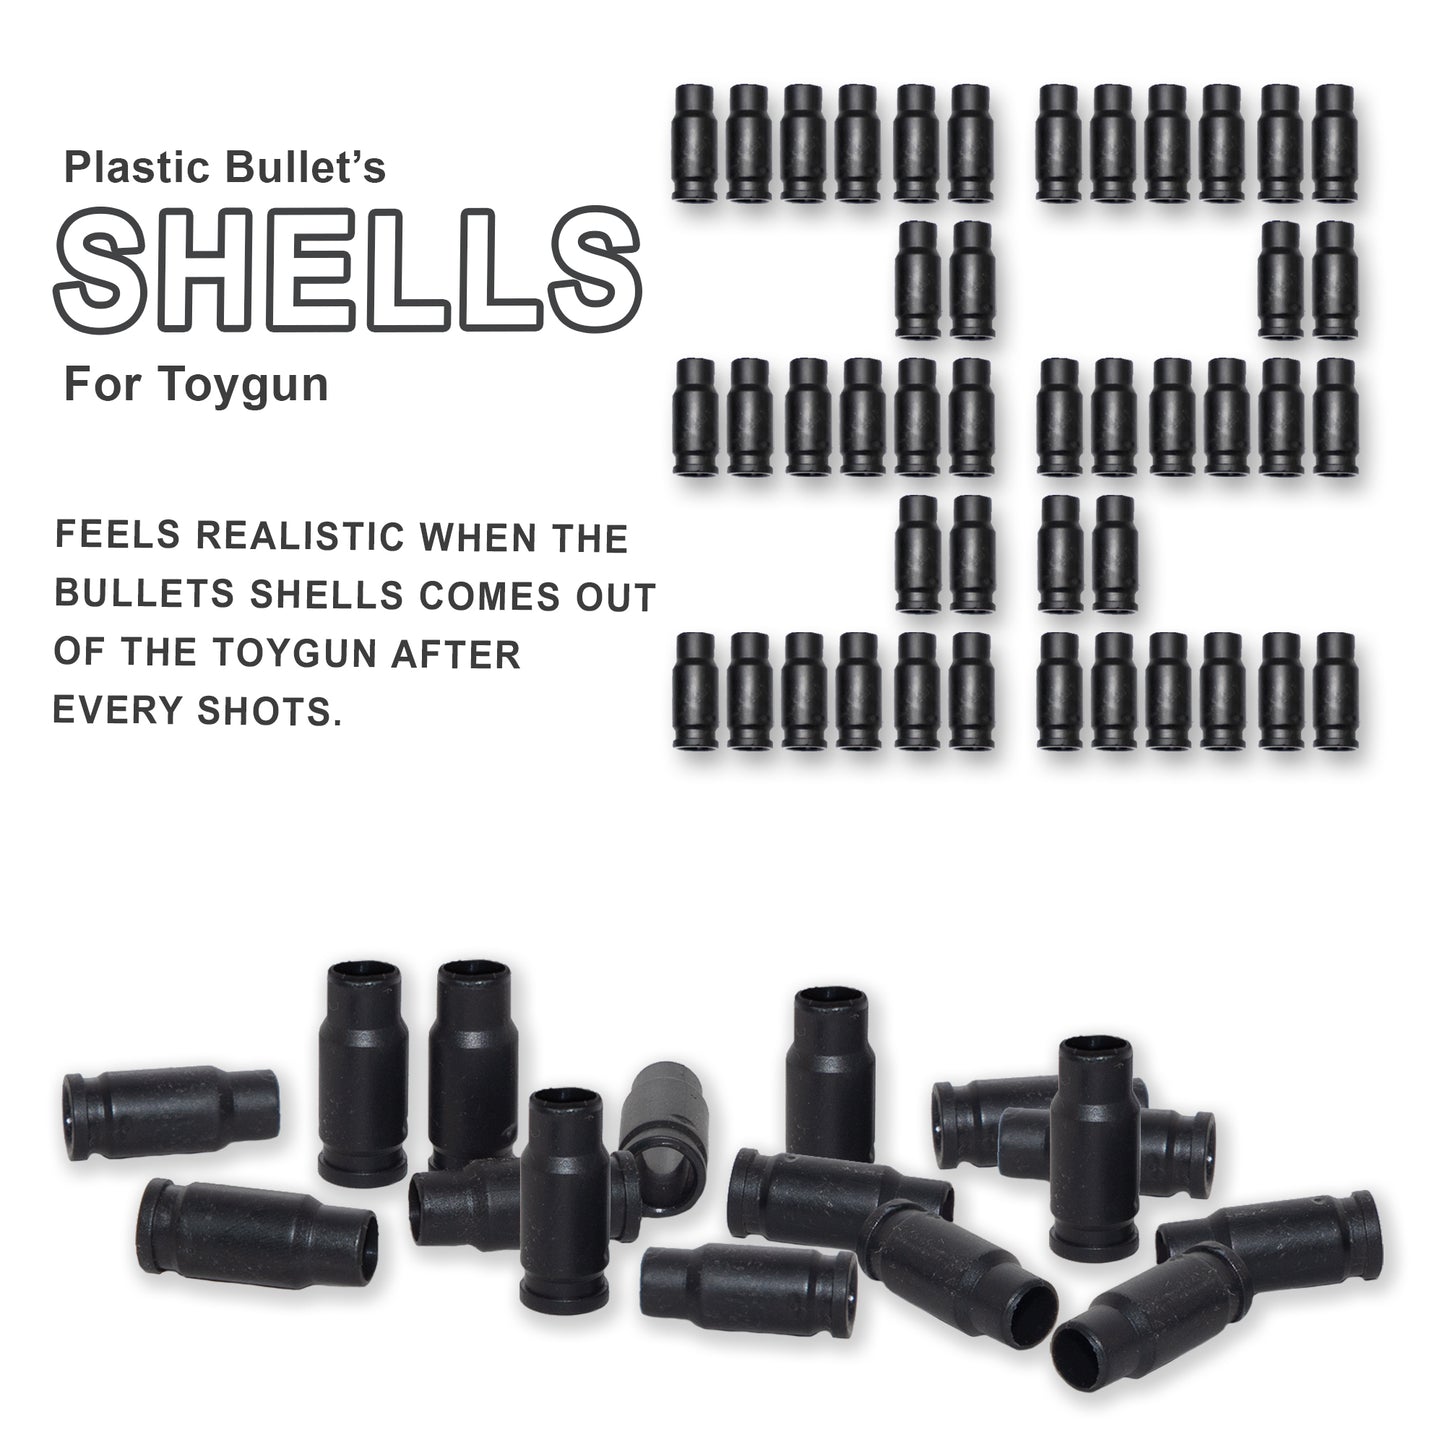 Bullet Shells for Jump Ejecting Action Toys | Toys for kids